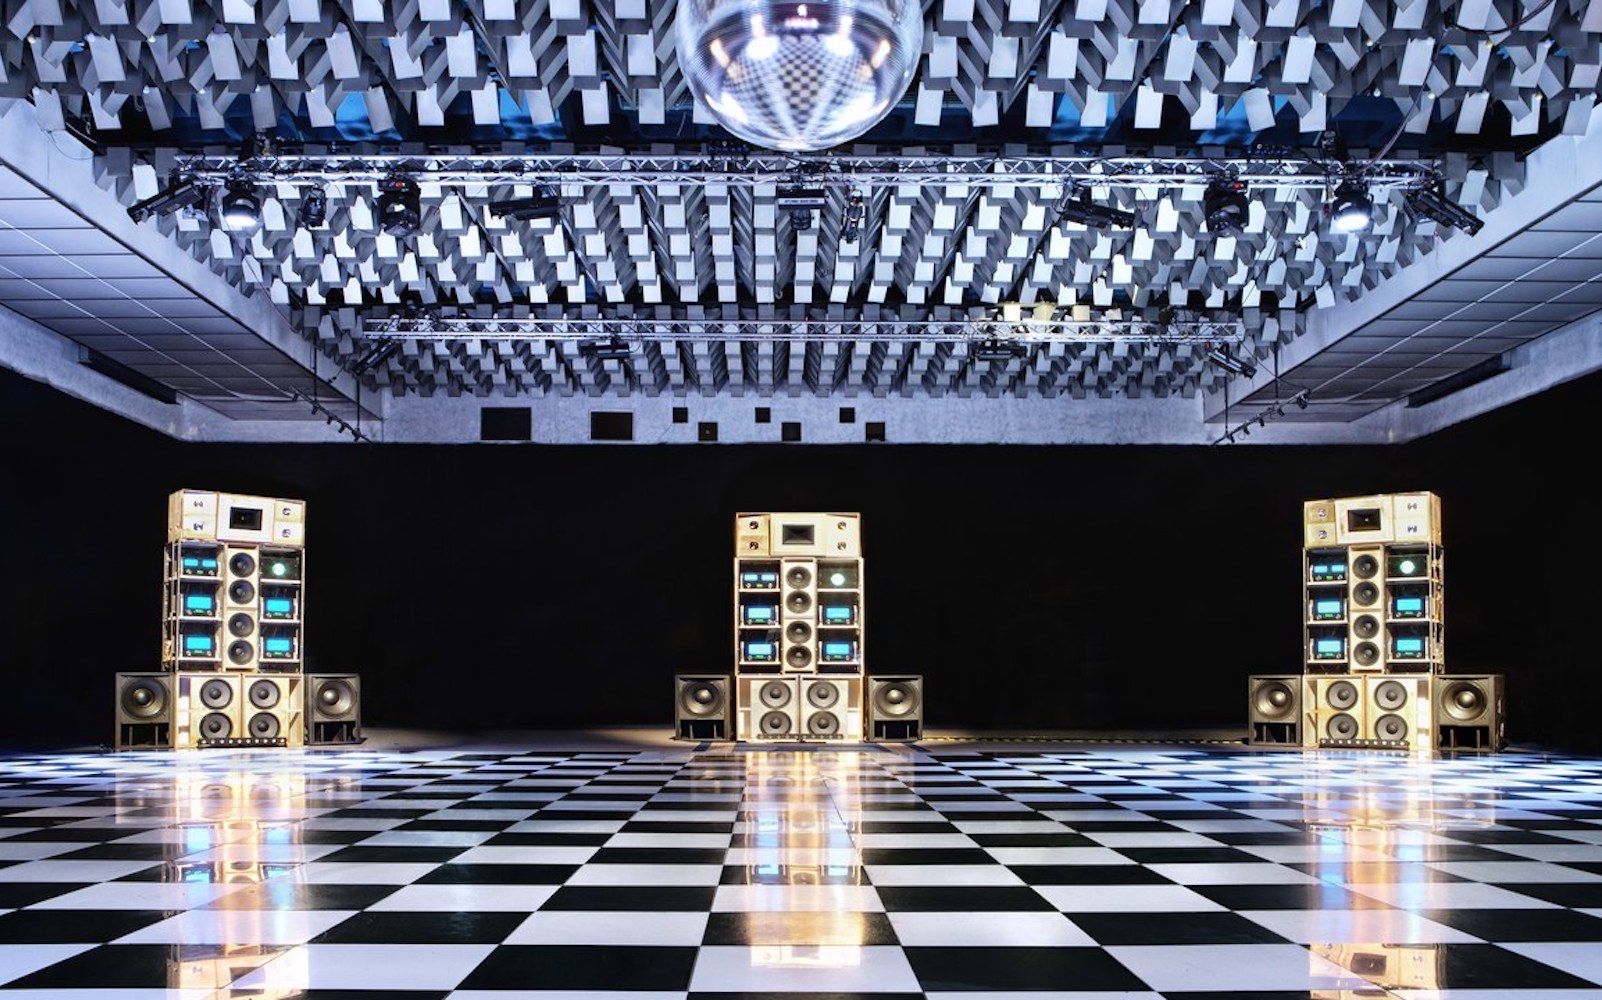 Night Fever. Designing Club Culture from 1960 to Today An exhibition at The Luigi Pecci Center in Tuscany focusing on the architecture of music clubs